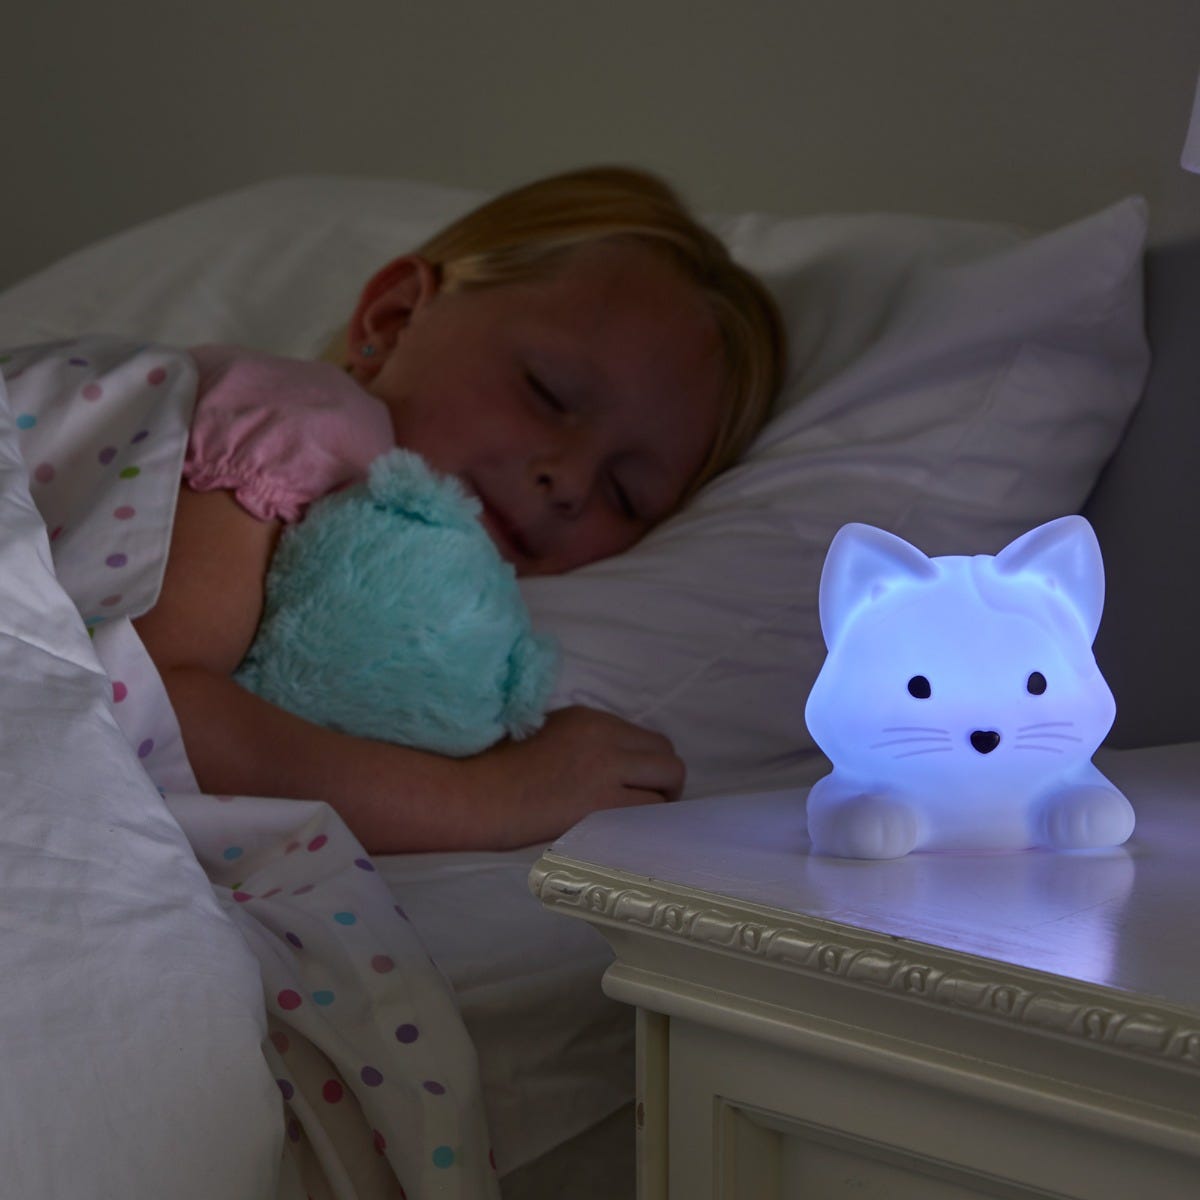 Luna The Calming Kitty, Luna The Calming Kitty is the purr-fect companion to help children manage stress and calm down at home, school, or anywhere they go. This squishy, soothing feline friend is designed to support mindfulness and deep breathing. Luna offers 3 different breathing patterns for children to practise and can be also used as a colourful night-light to comfort children at bedtime. Press Luna’s paw to activate and help children manage their emotions and develop mindfulness through guided breathi